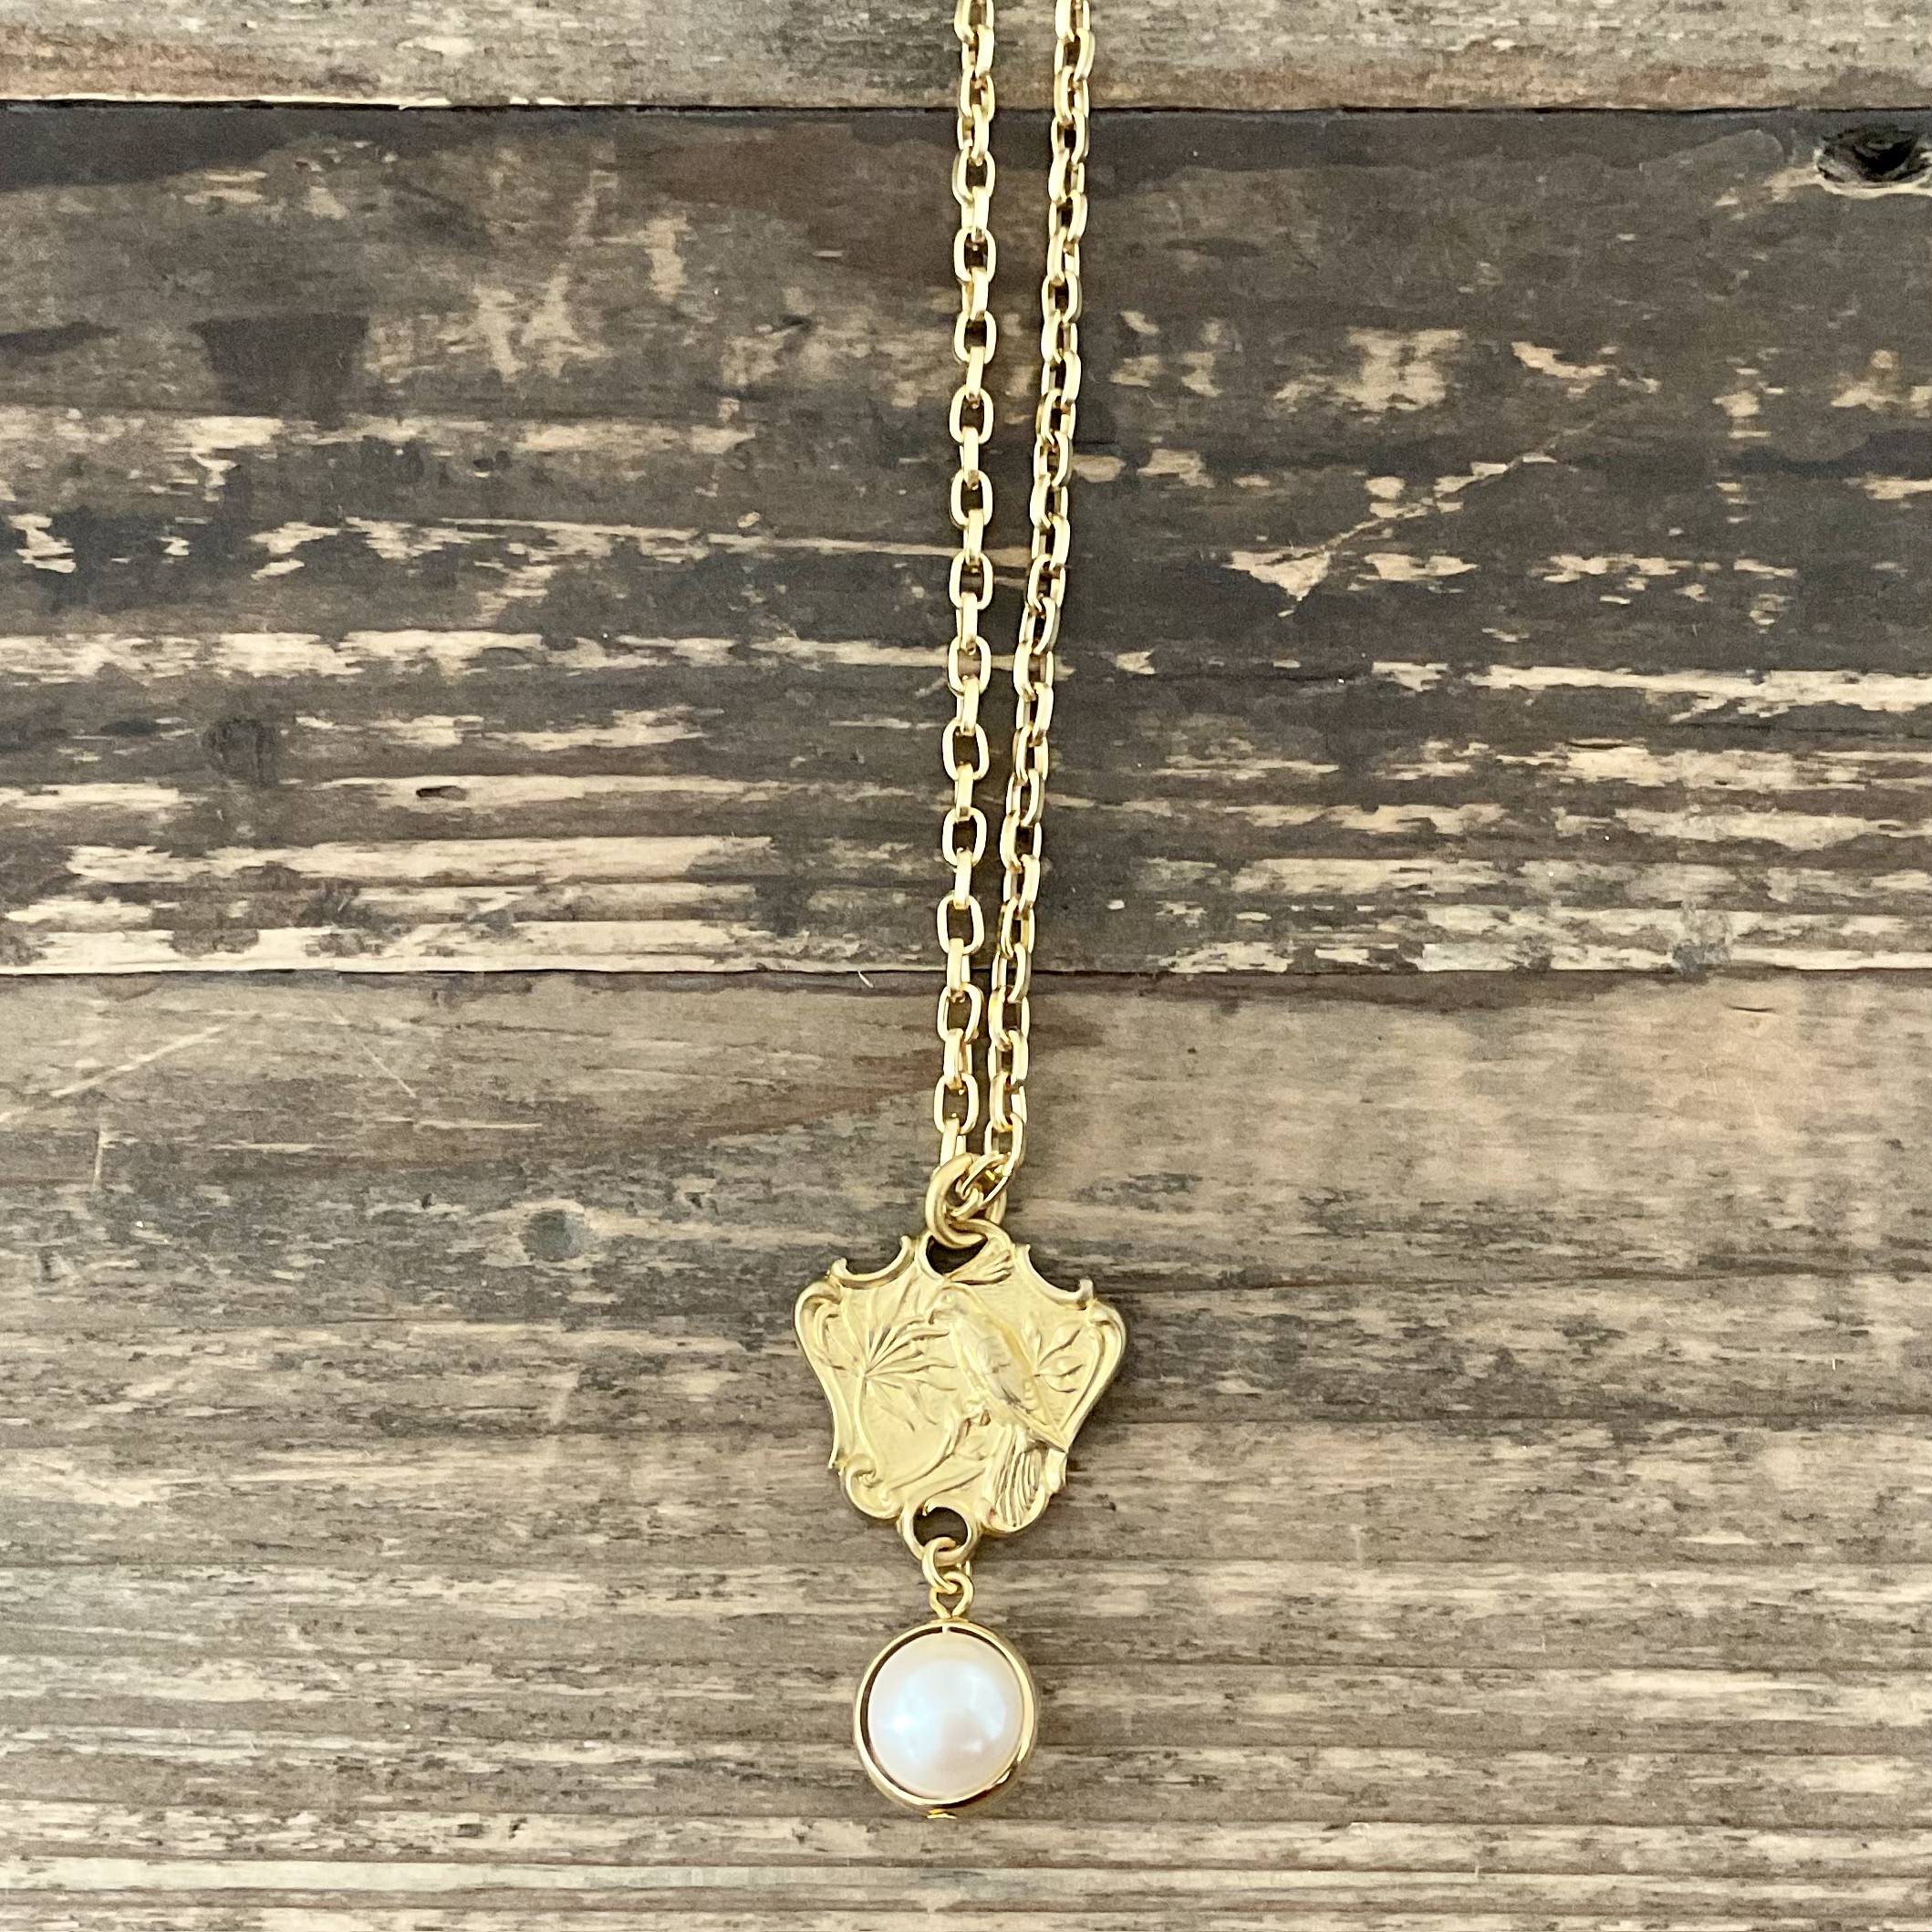 Gold Plated Chain with Vintage Bird Pendant & Pearl 20"